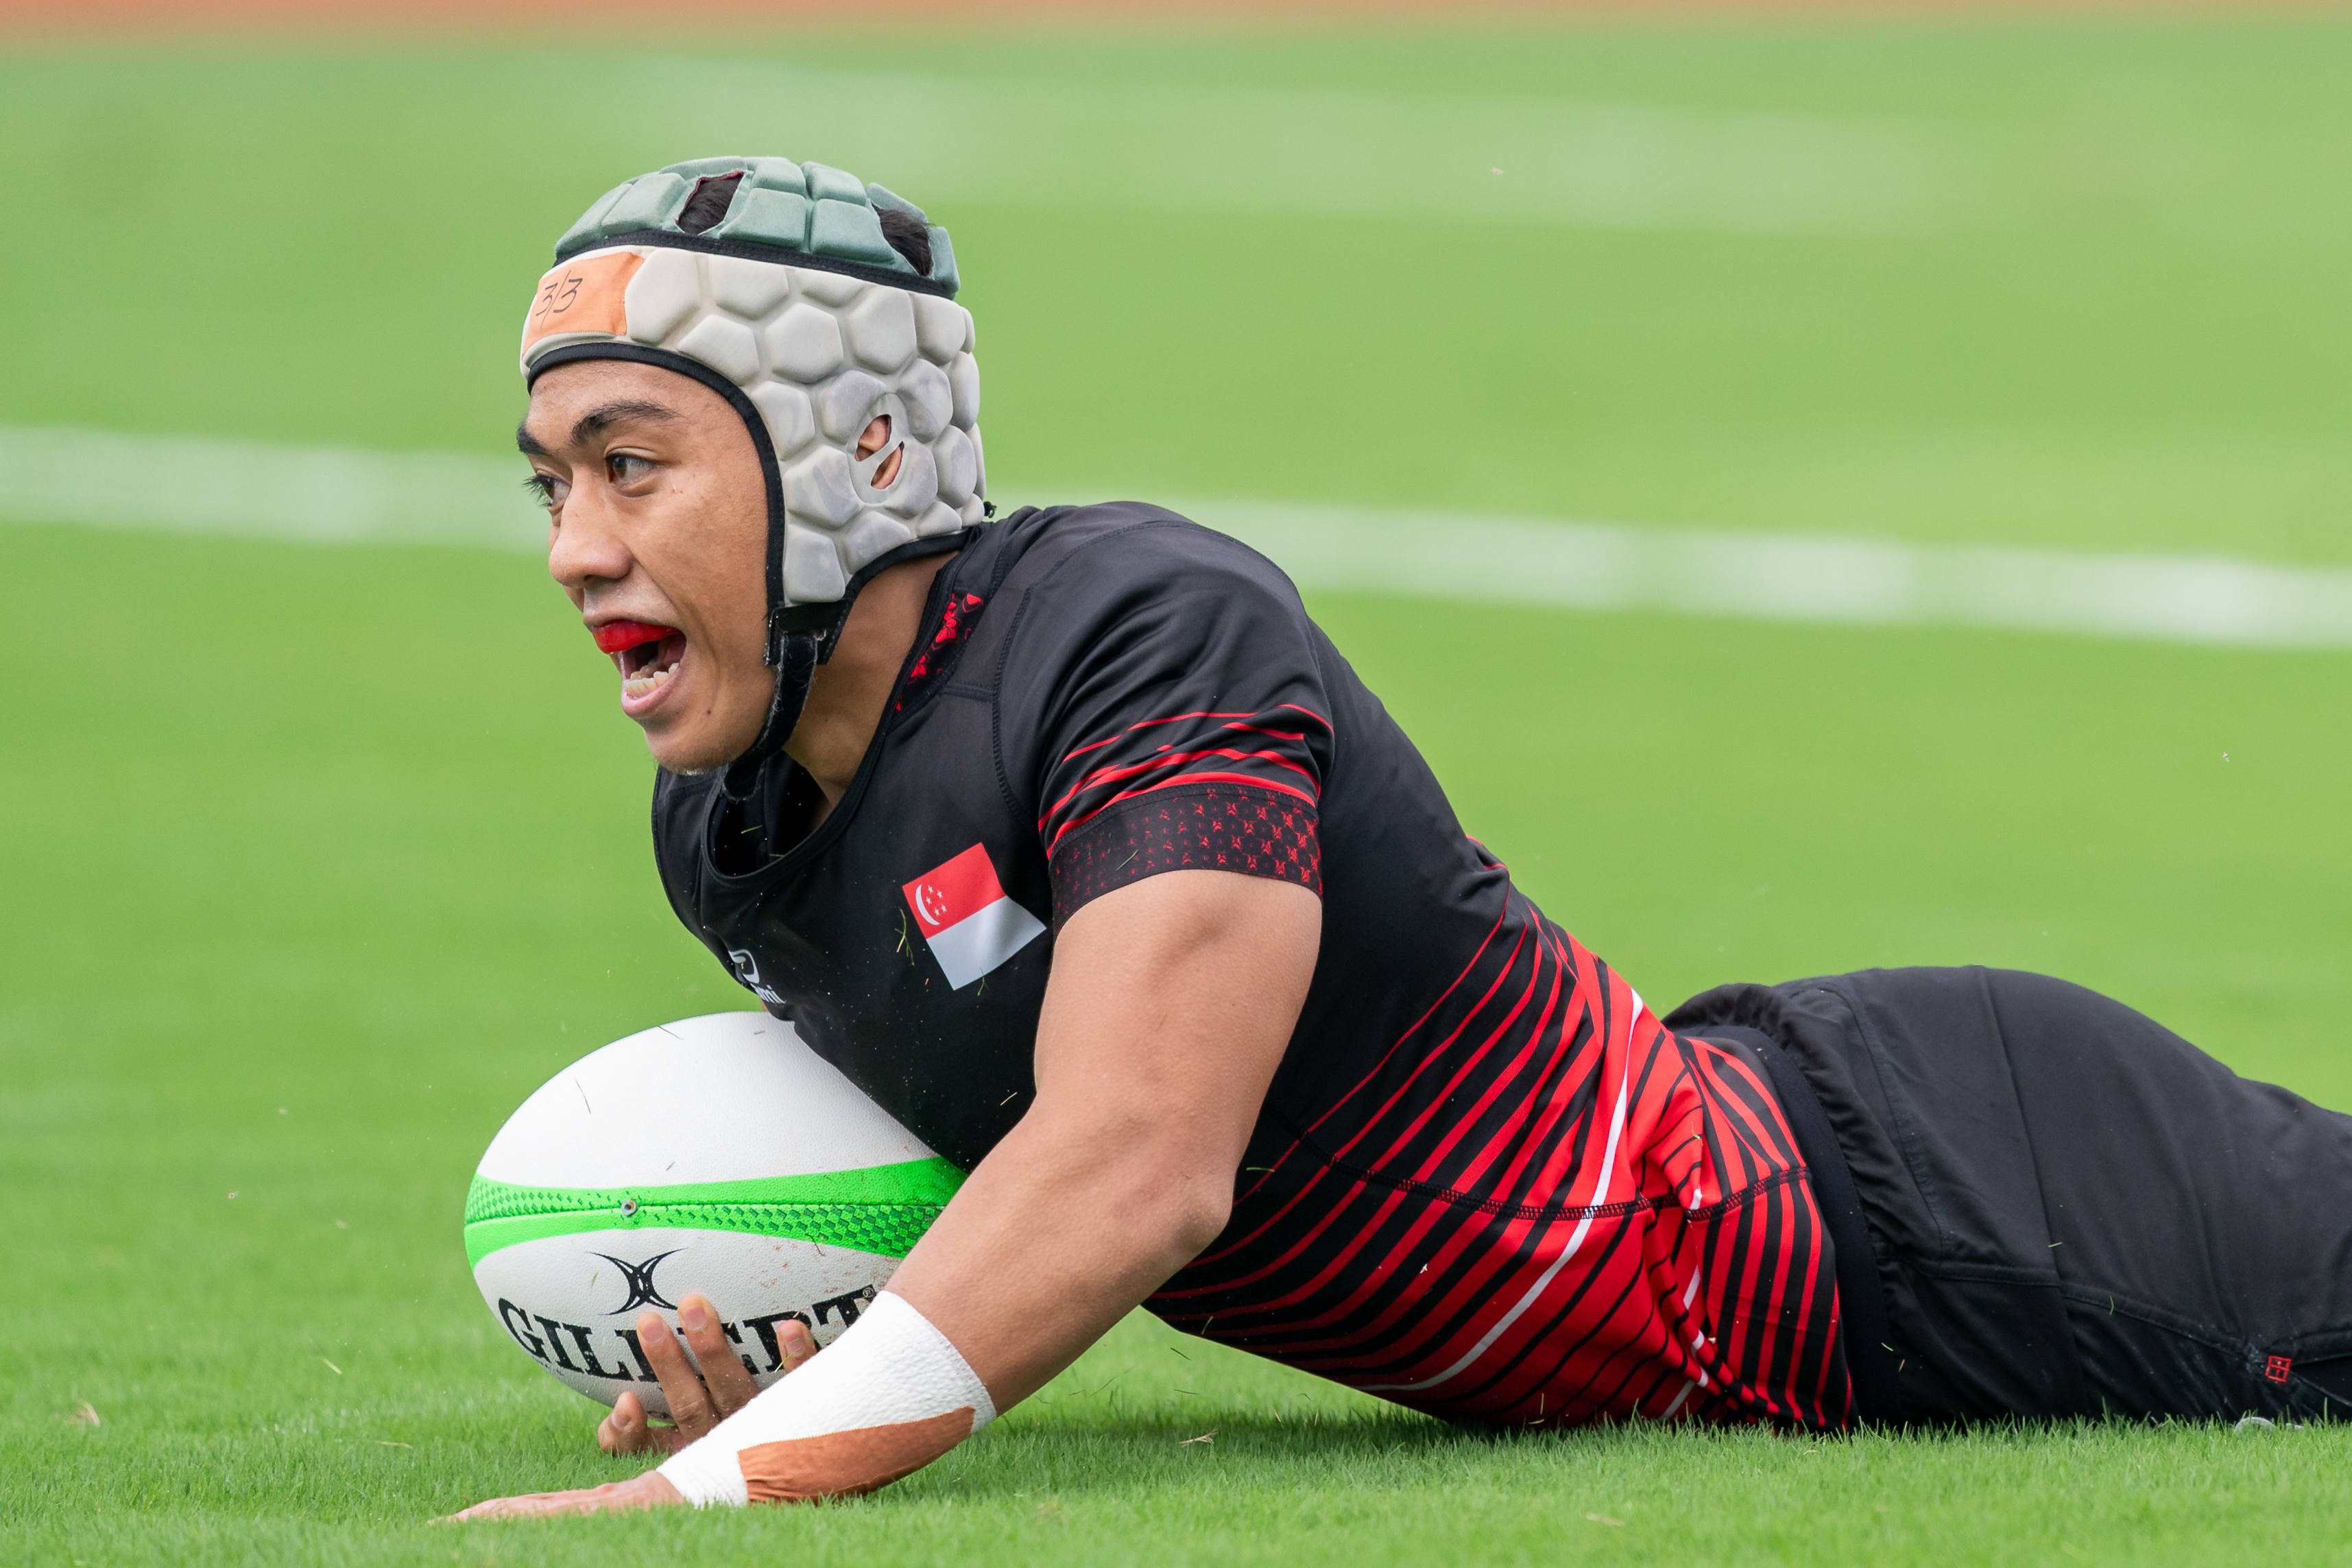 Hangzhou 2022: Sevens squads take heart from brave Asiad showing